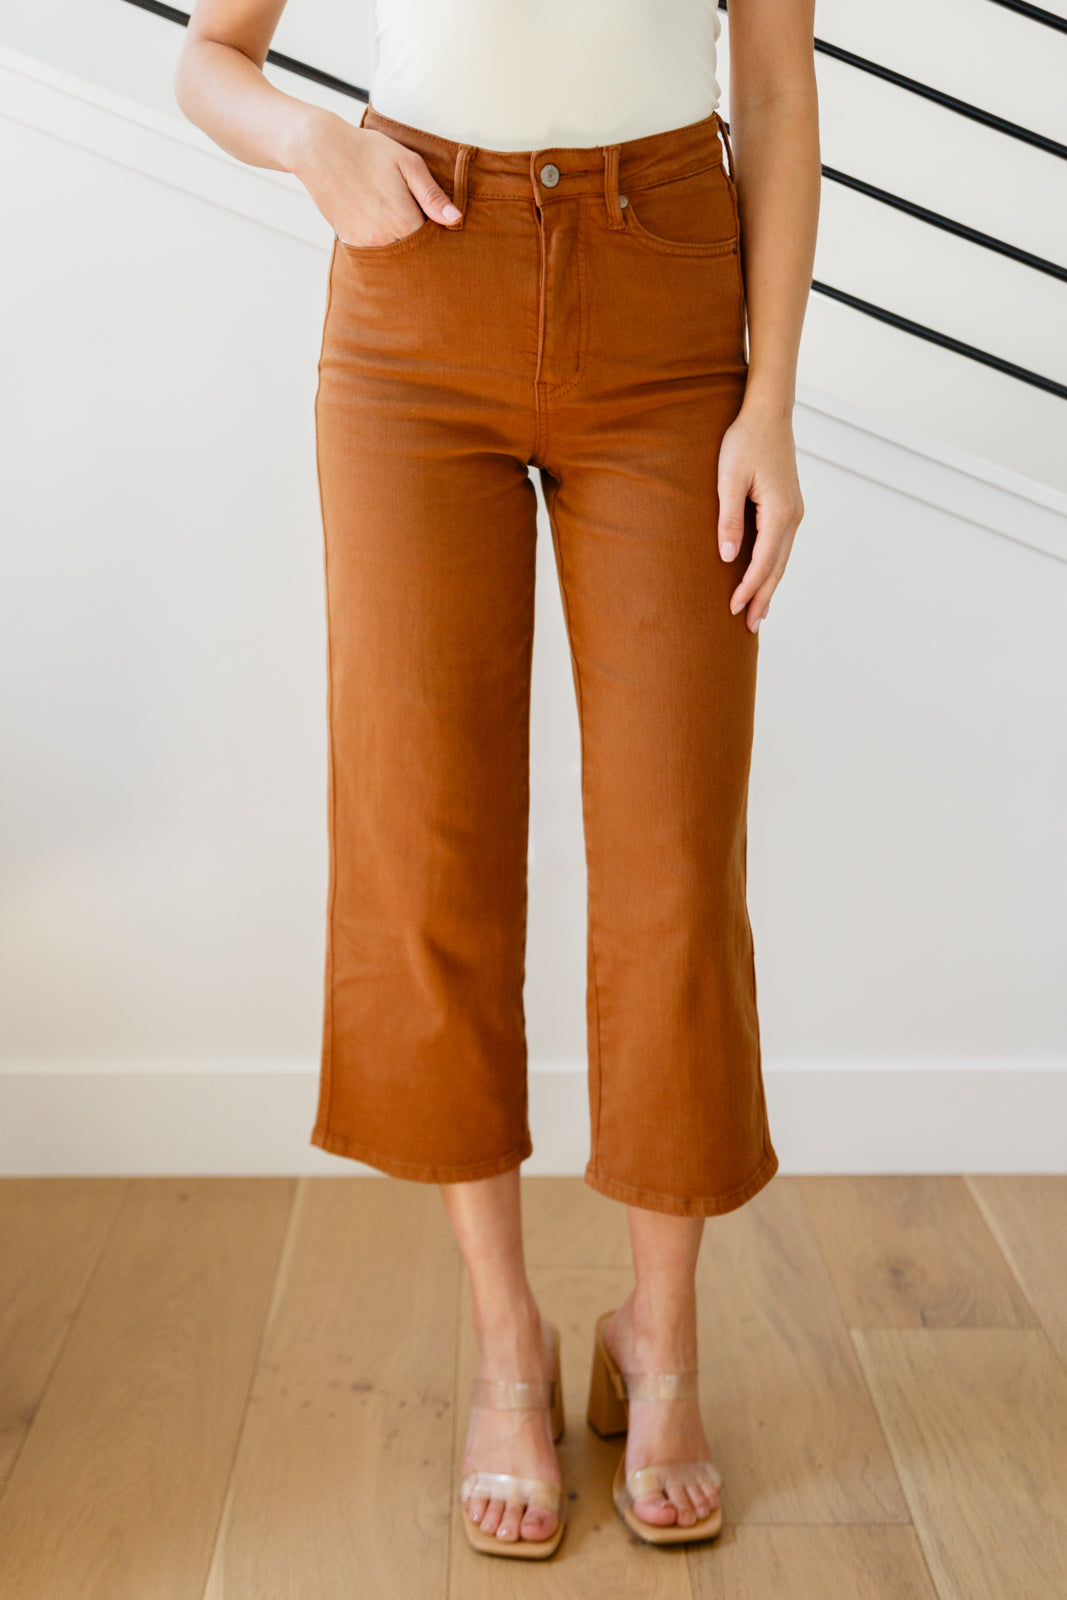 Judy Blue Caramel Apple Cropped Jeans